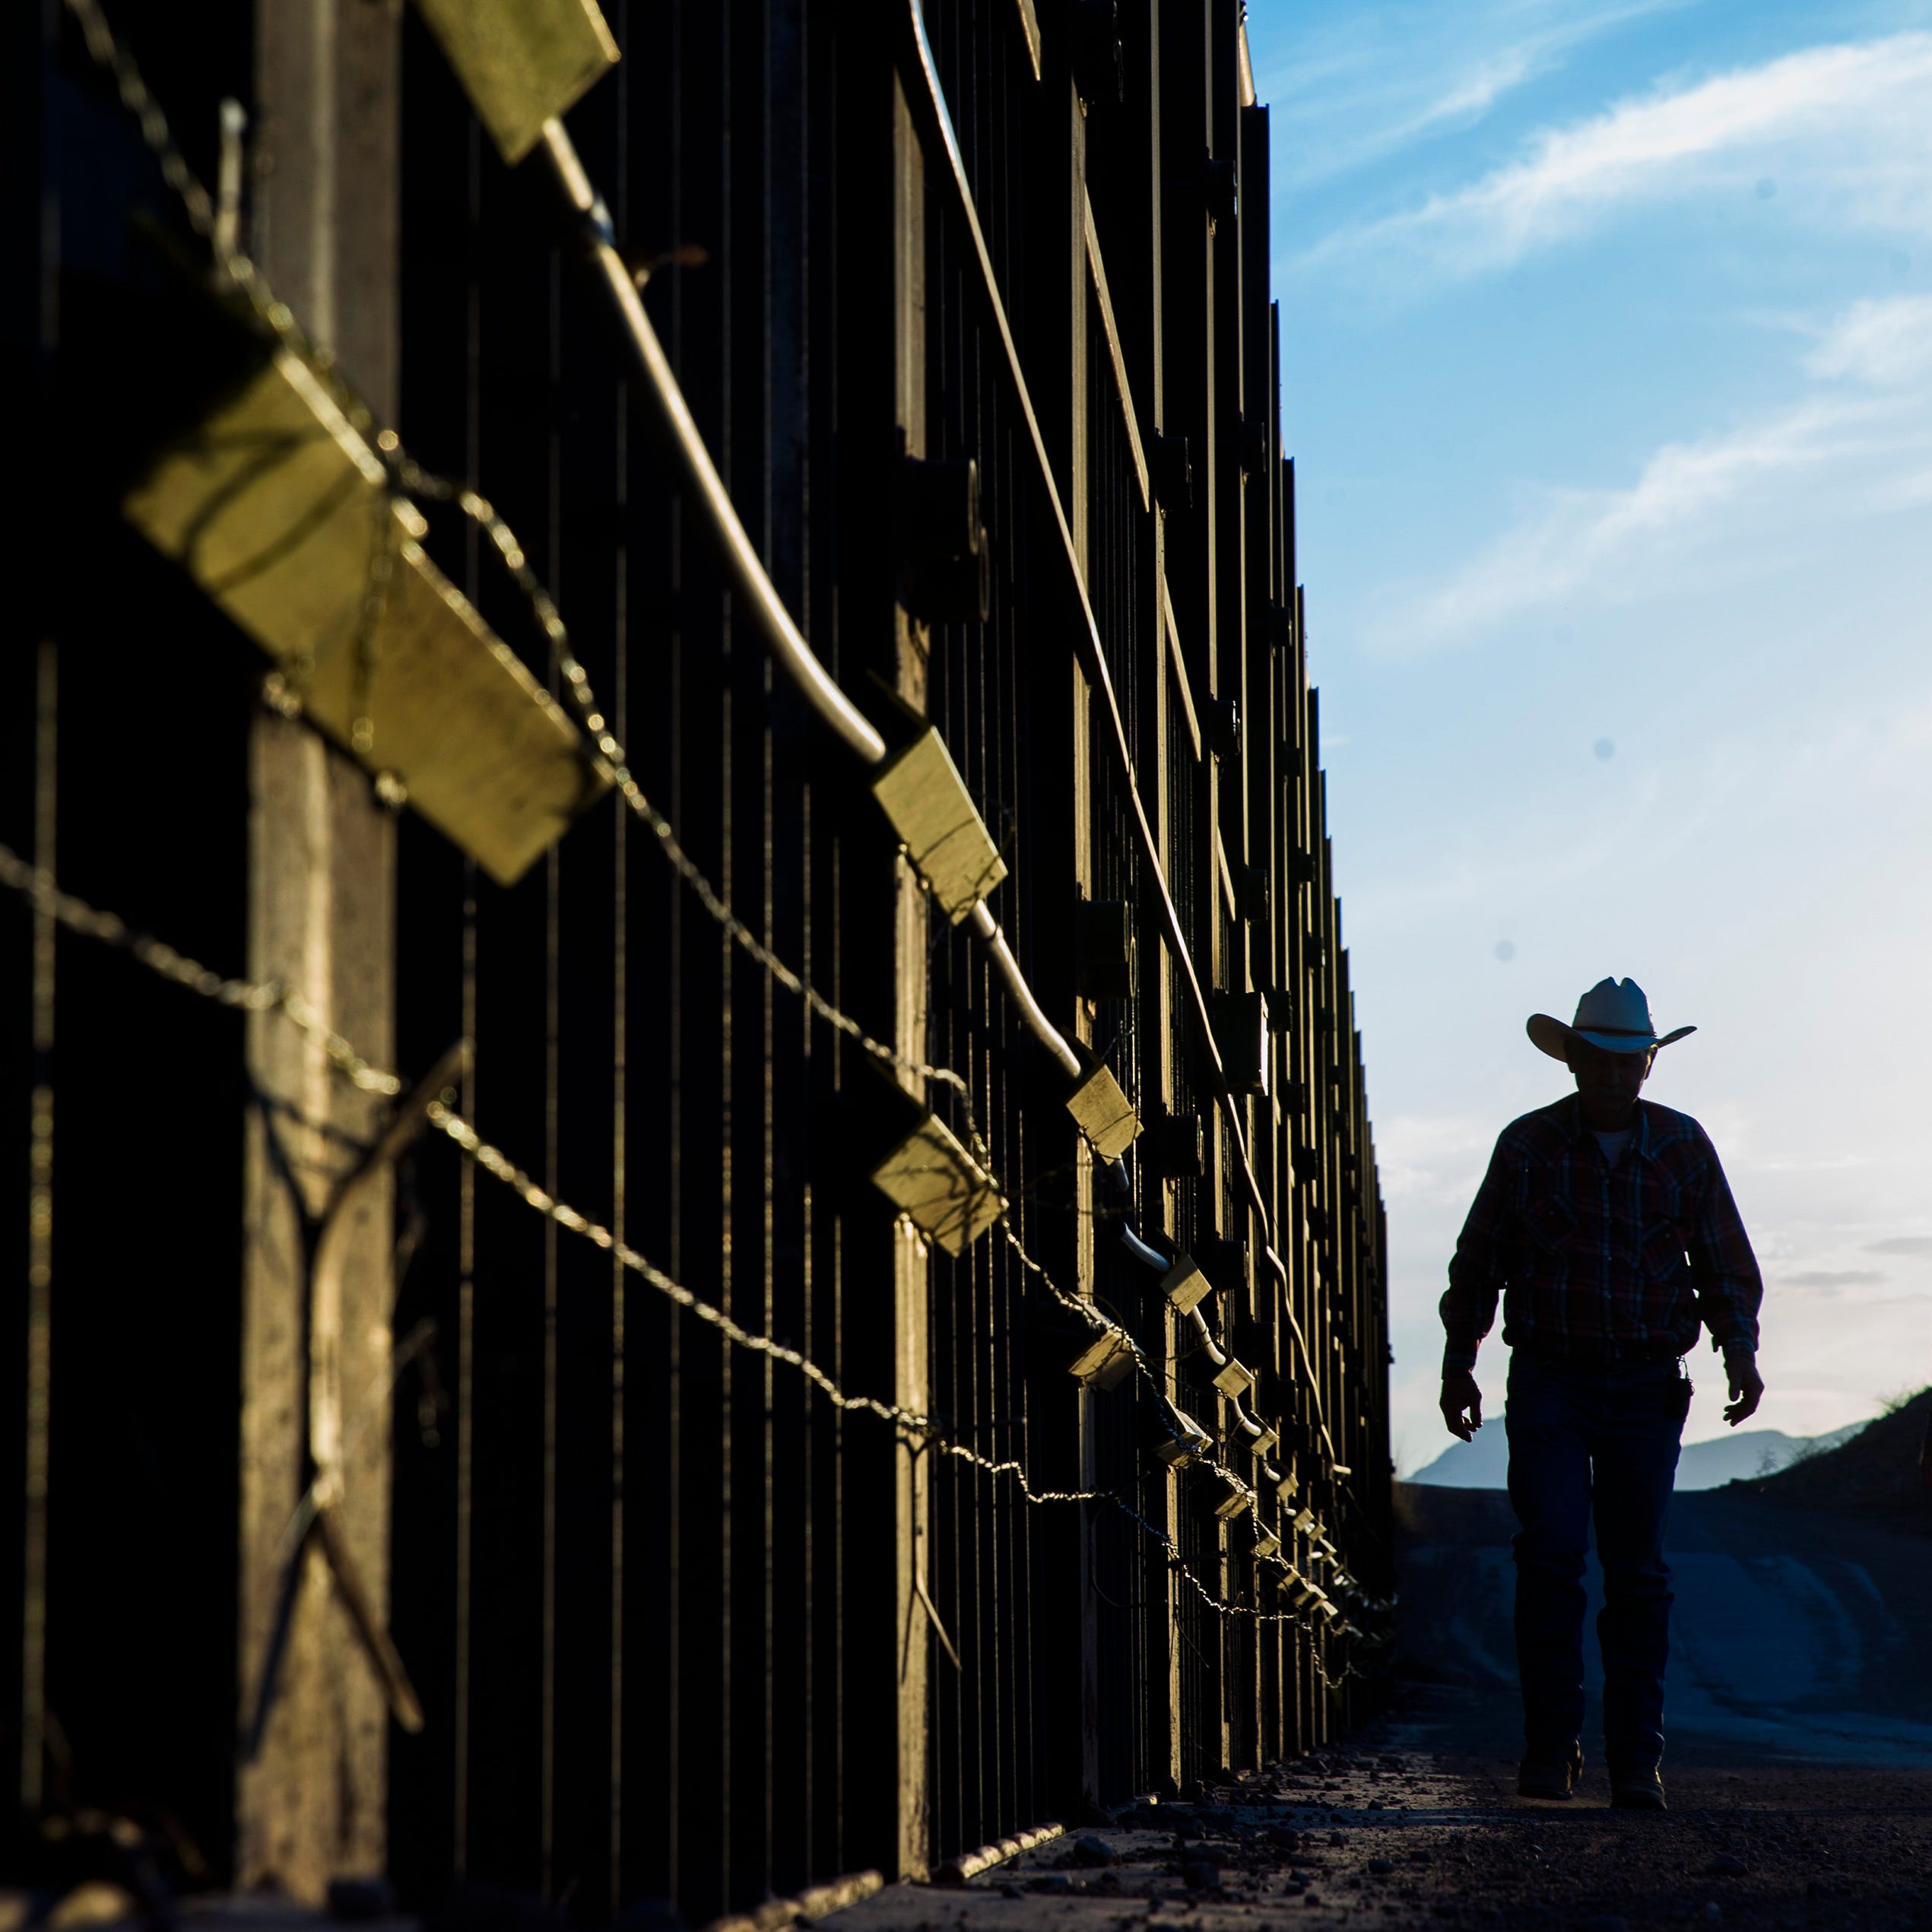 Rancher John Ladd walks along the fence on his ranch, which borders with Mexico. He has been frustrated for years over the illegal border crossers and drug smugglers who cut through his ranch. The 16,000-acre operation has been in the Ladd family for